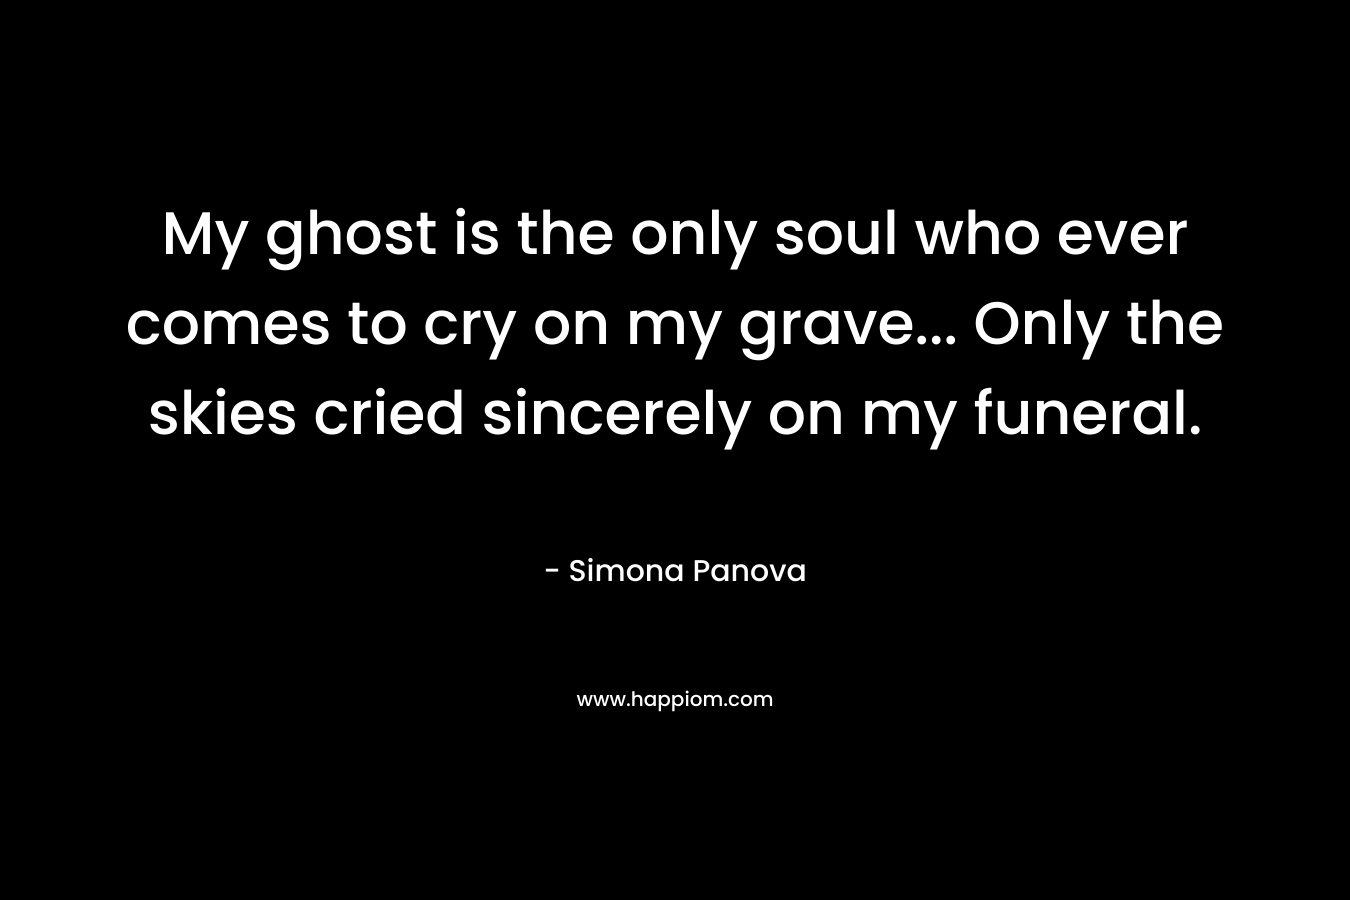 My ghost is the only soul who ever comes to cry on my grave… Only the skies cried sincerely on my funeral. – Simona Panova